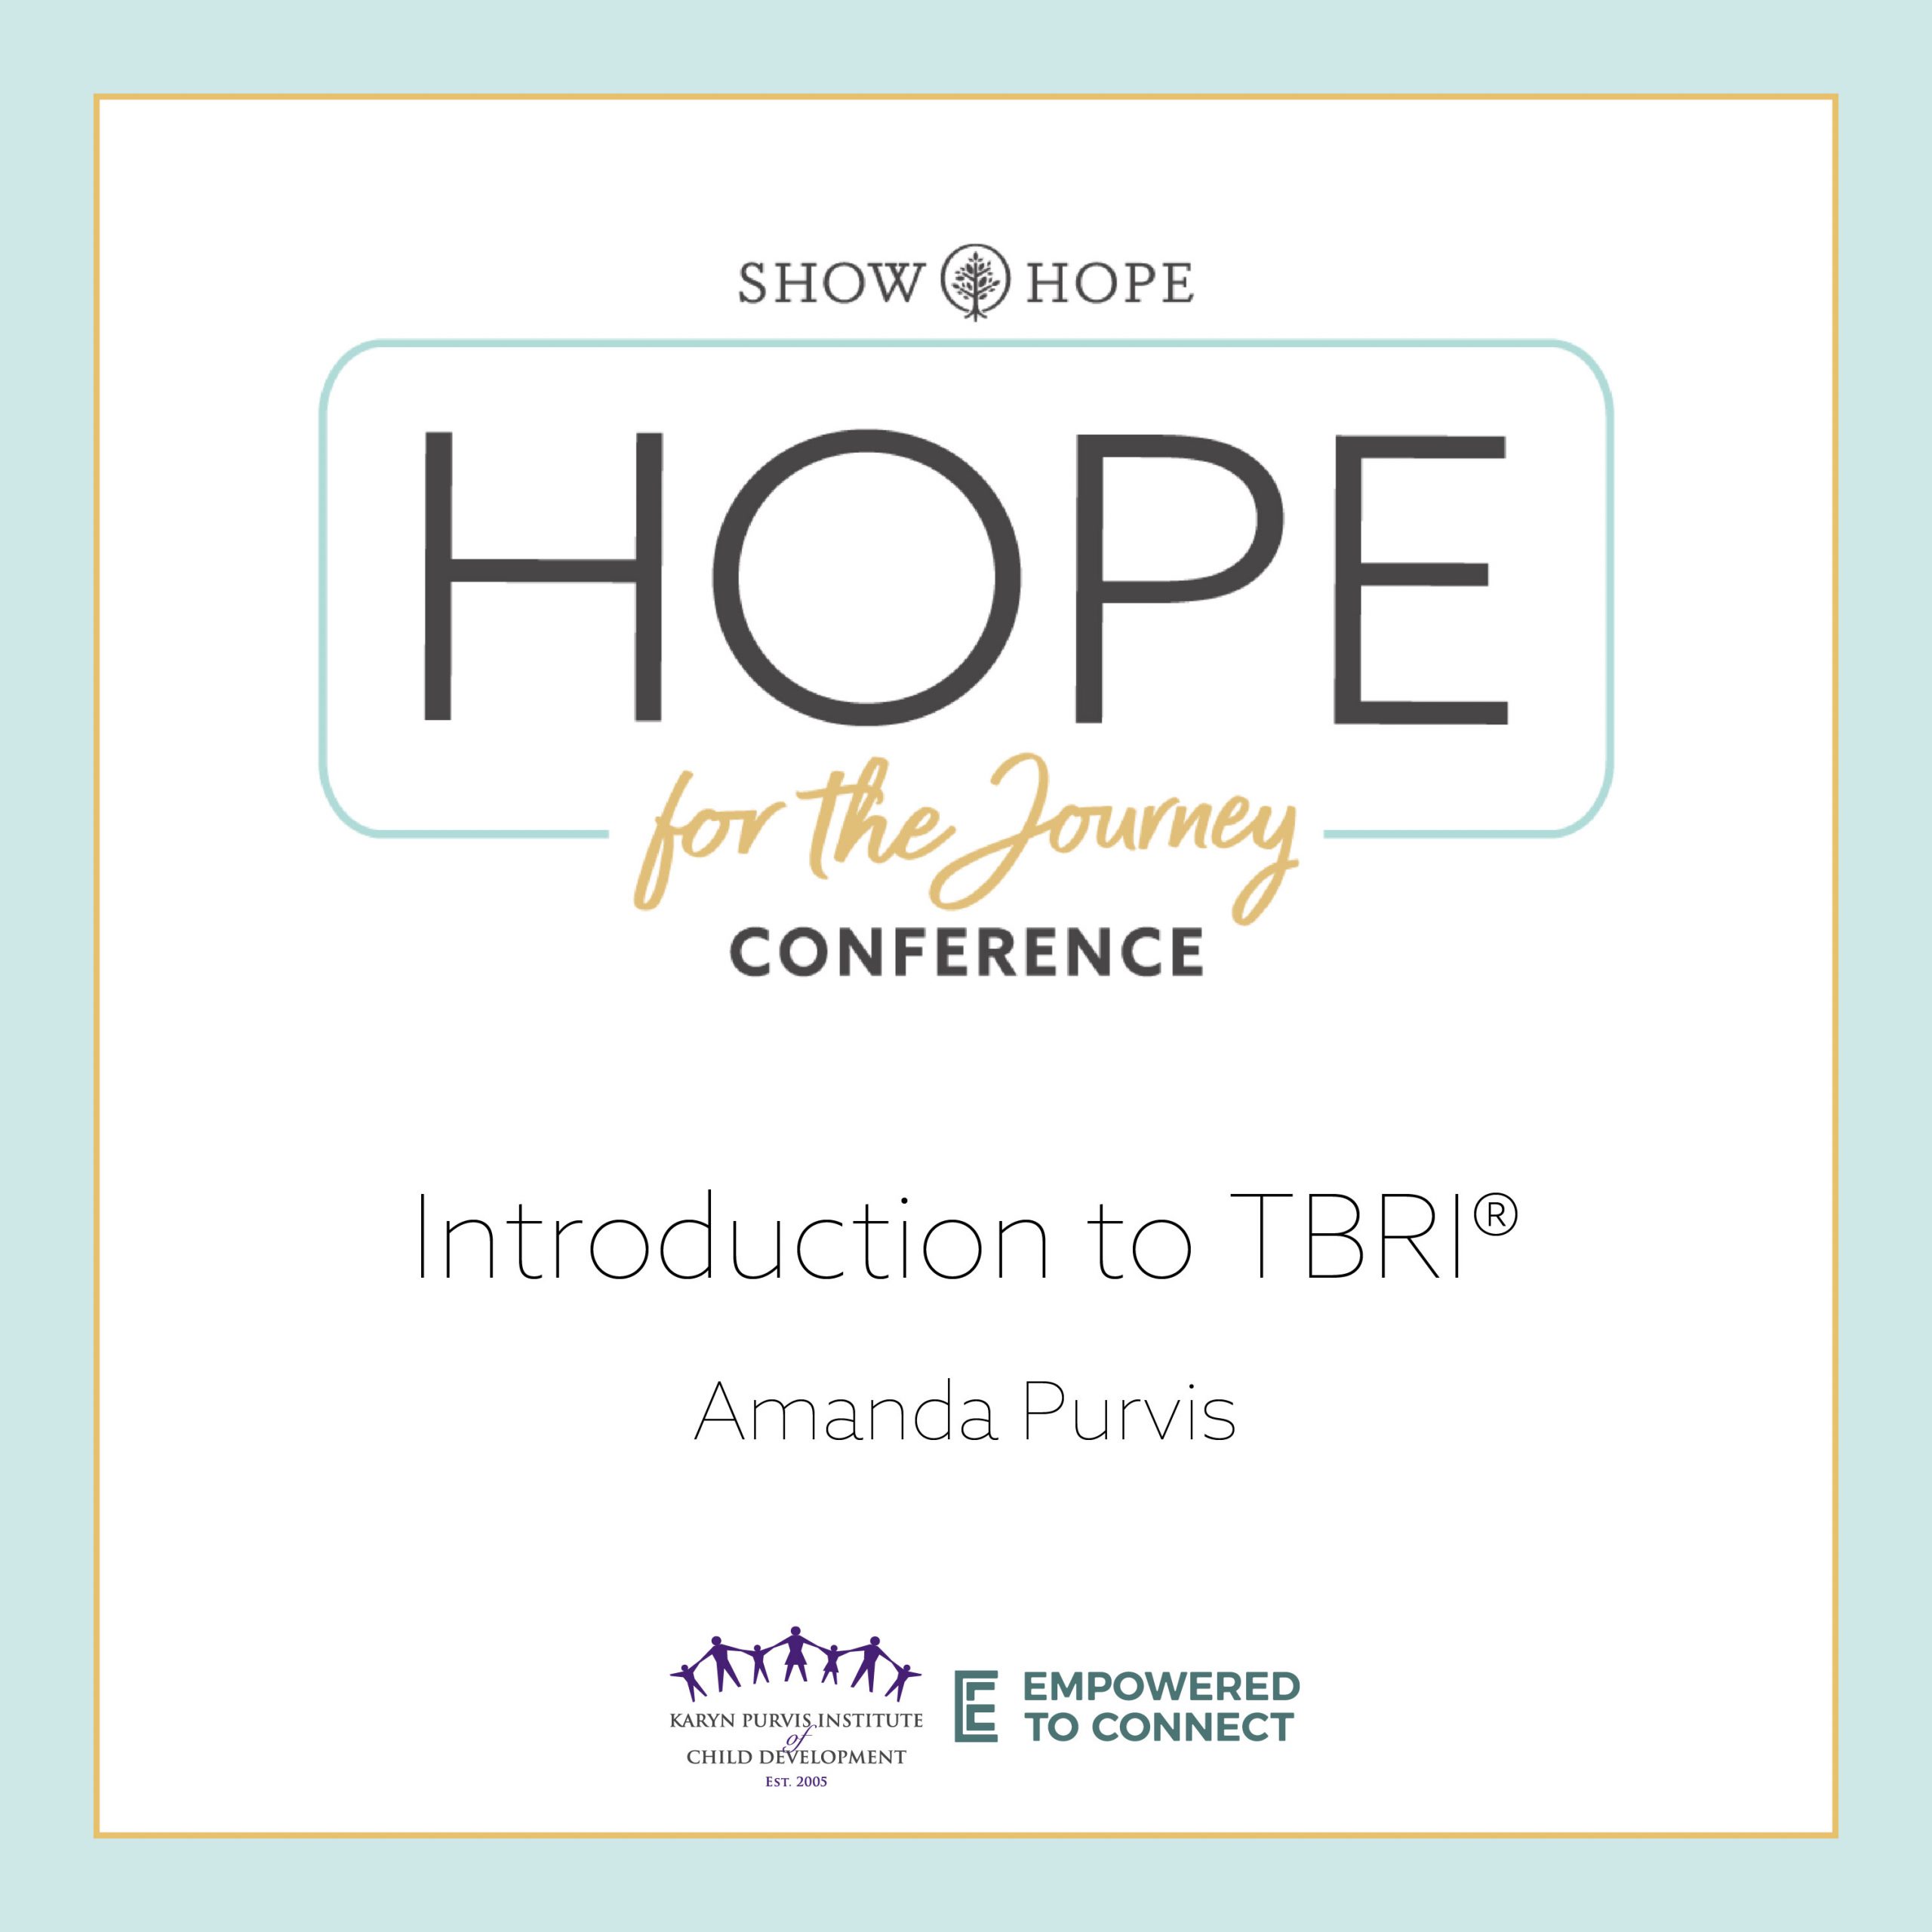 Hope for the Journey Conference 2022 Introduction to TBRI with Amanda Purvis